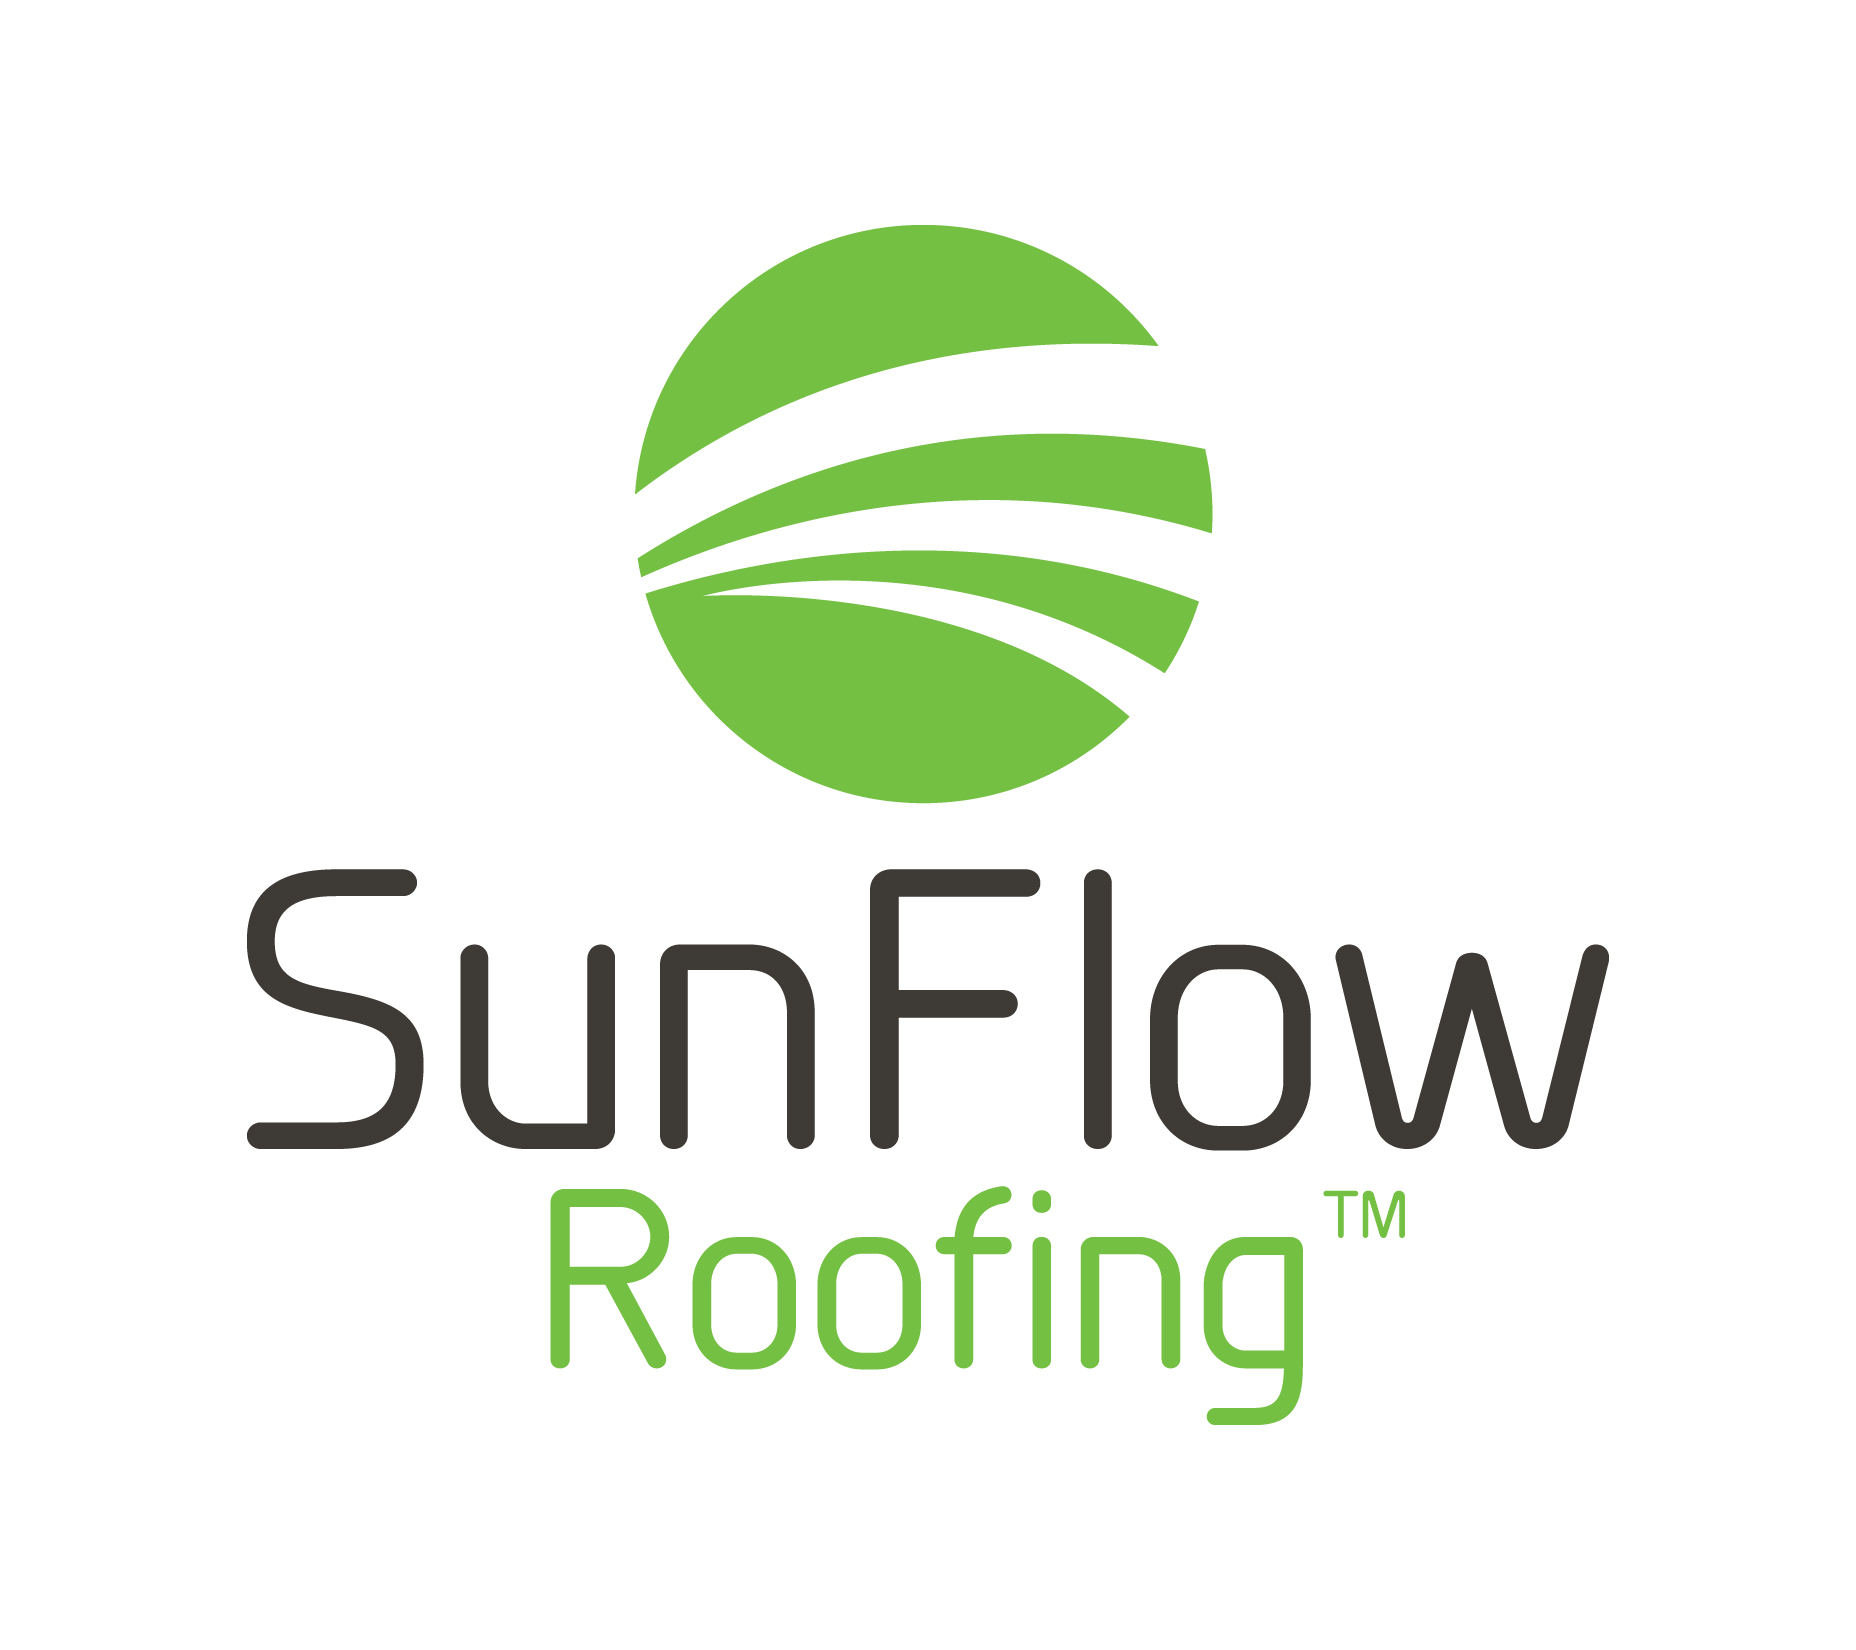 Sunflow Roofing's logo